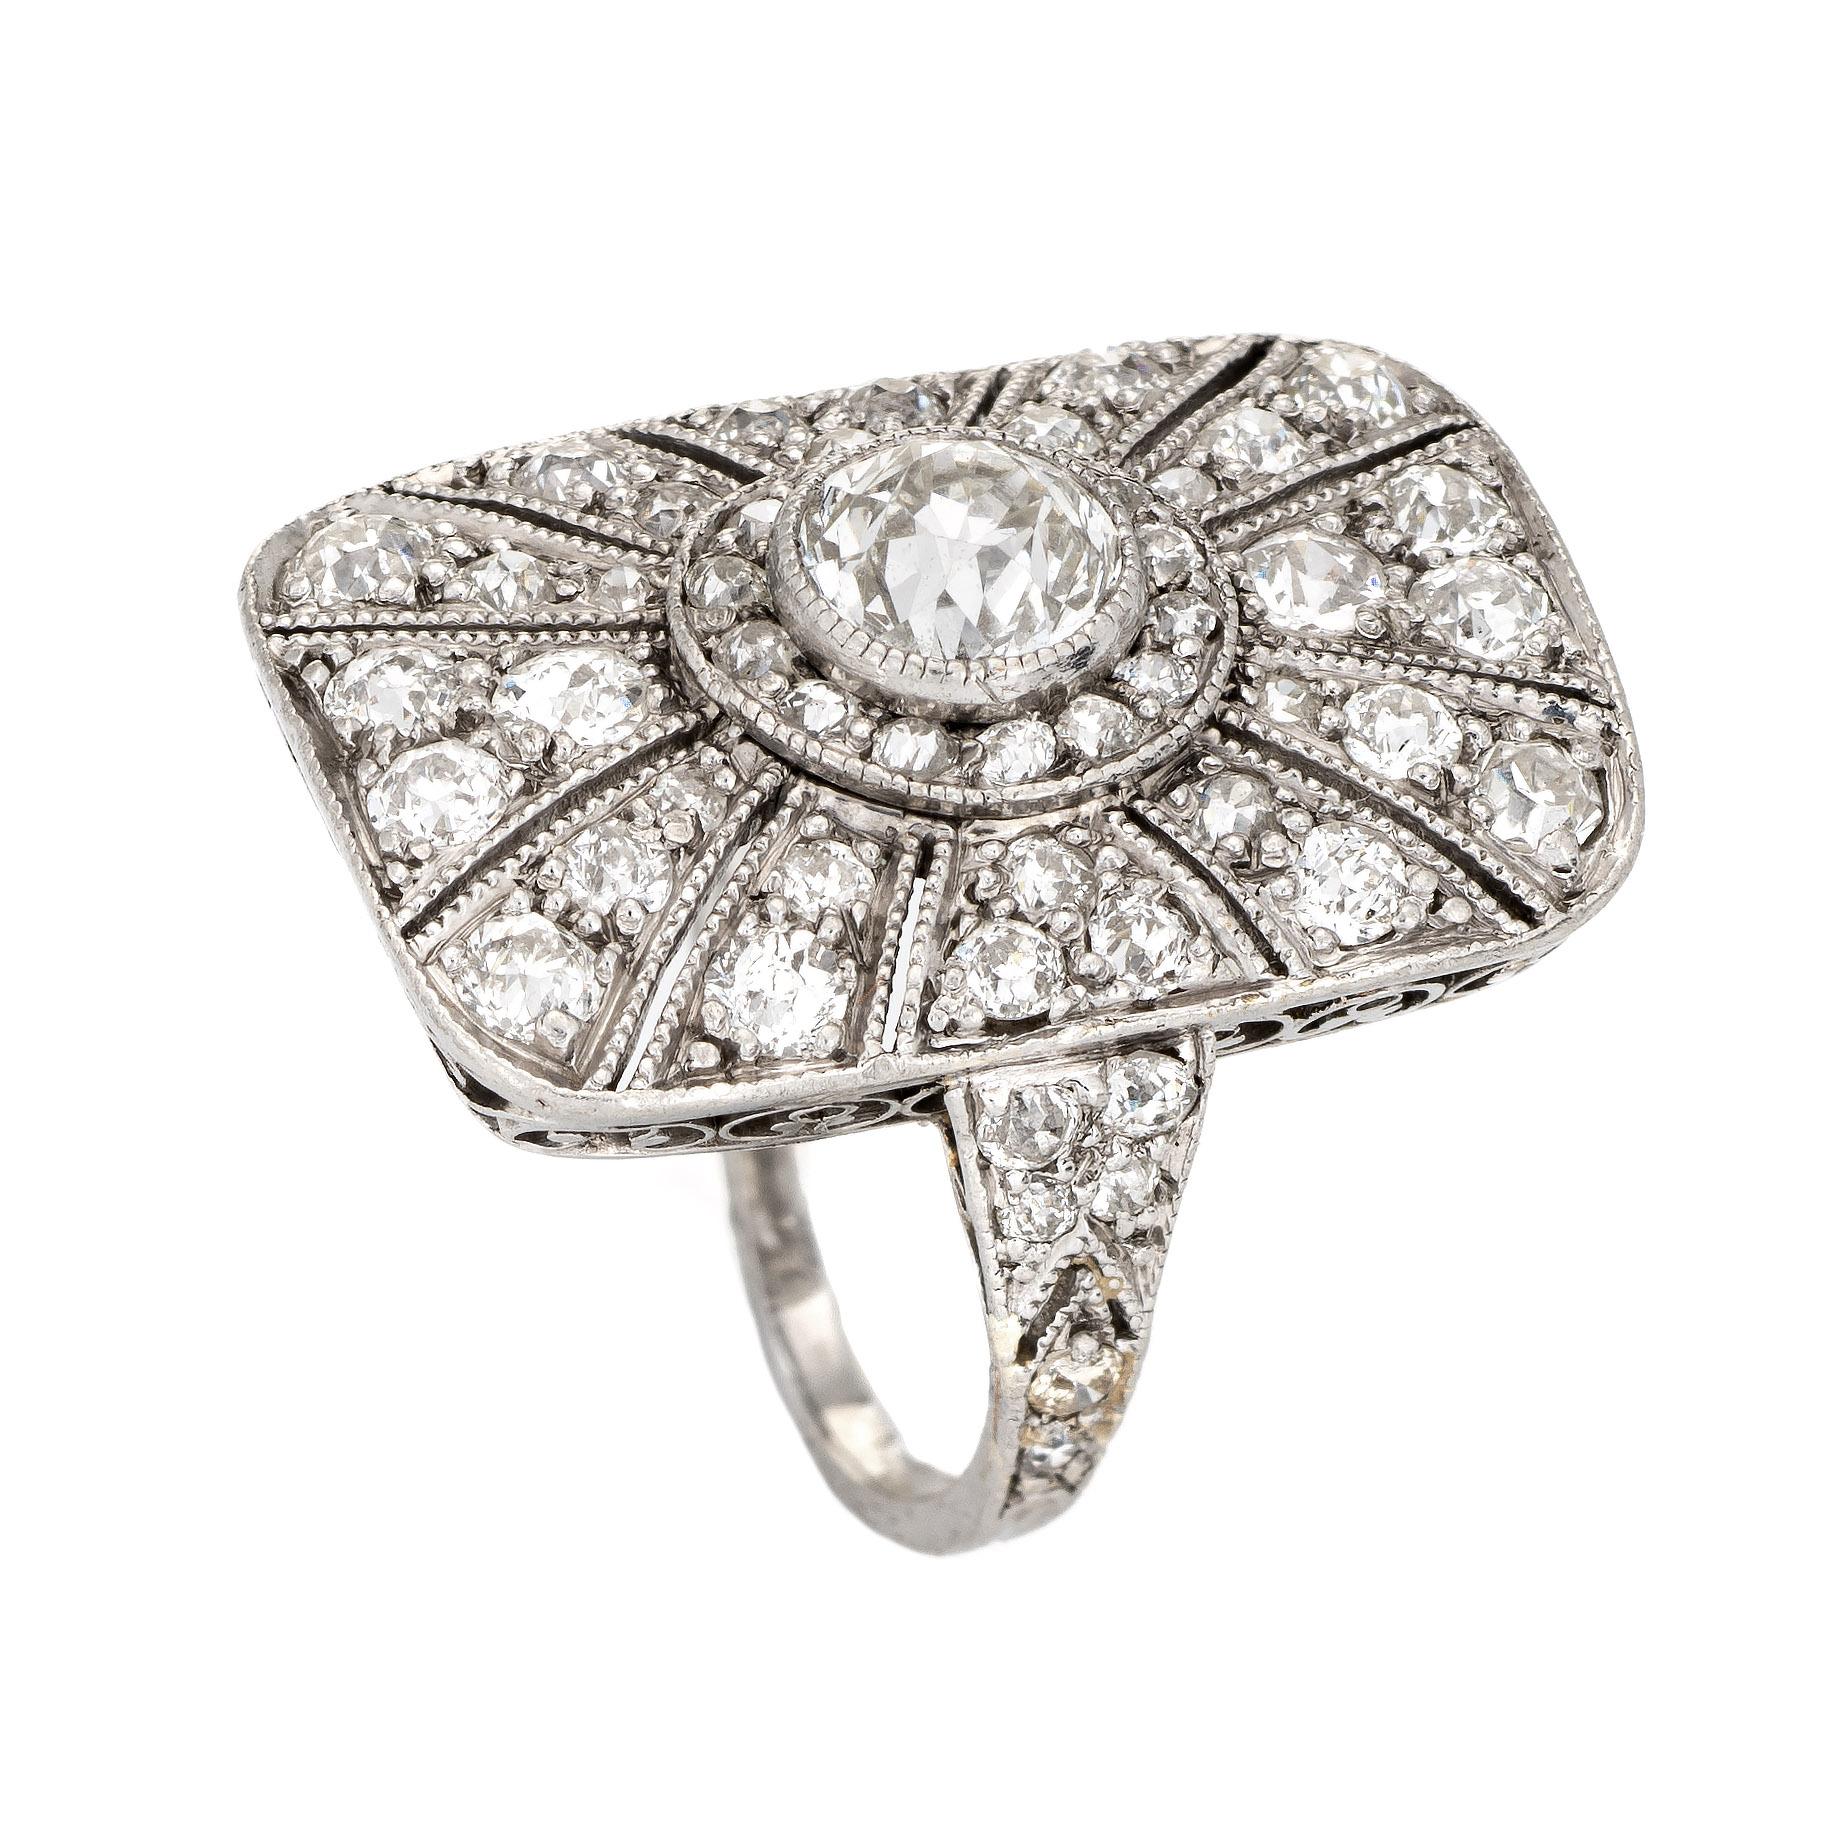 Finely detailed antique Edwardian diamond ring crafted in platinum (circa 1910s to 1920s).  

Center set old European cut diamond is estimated at 0.60 carats, accented with a further 1.10 carats of diamonds. The total diamond weight is estimated at